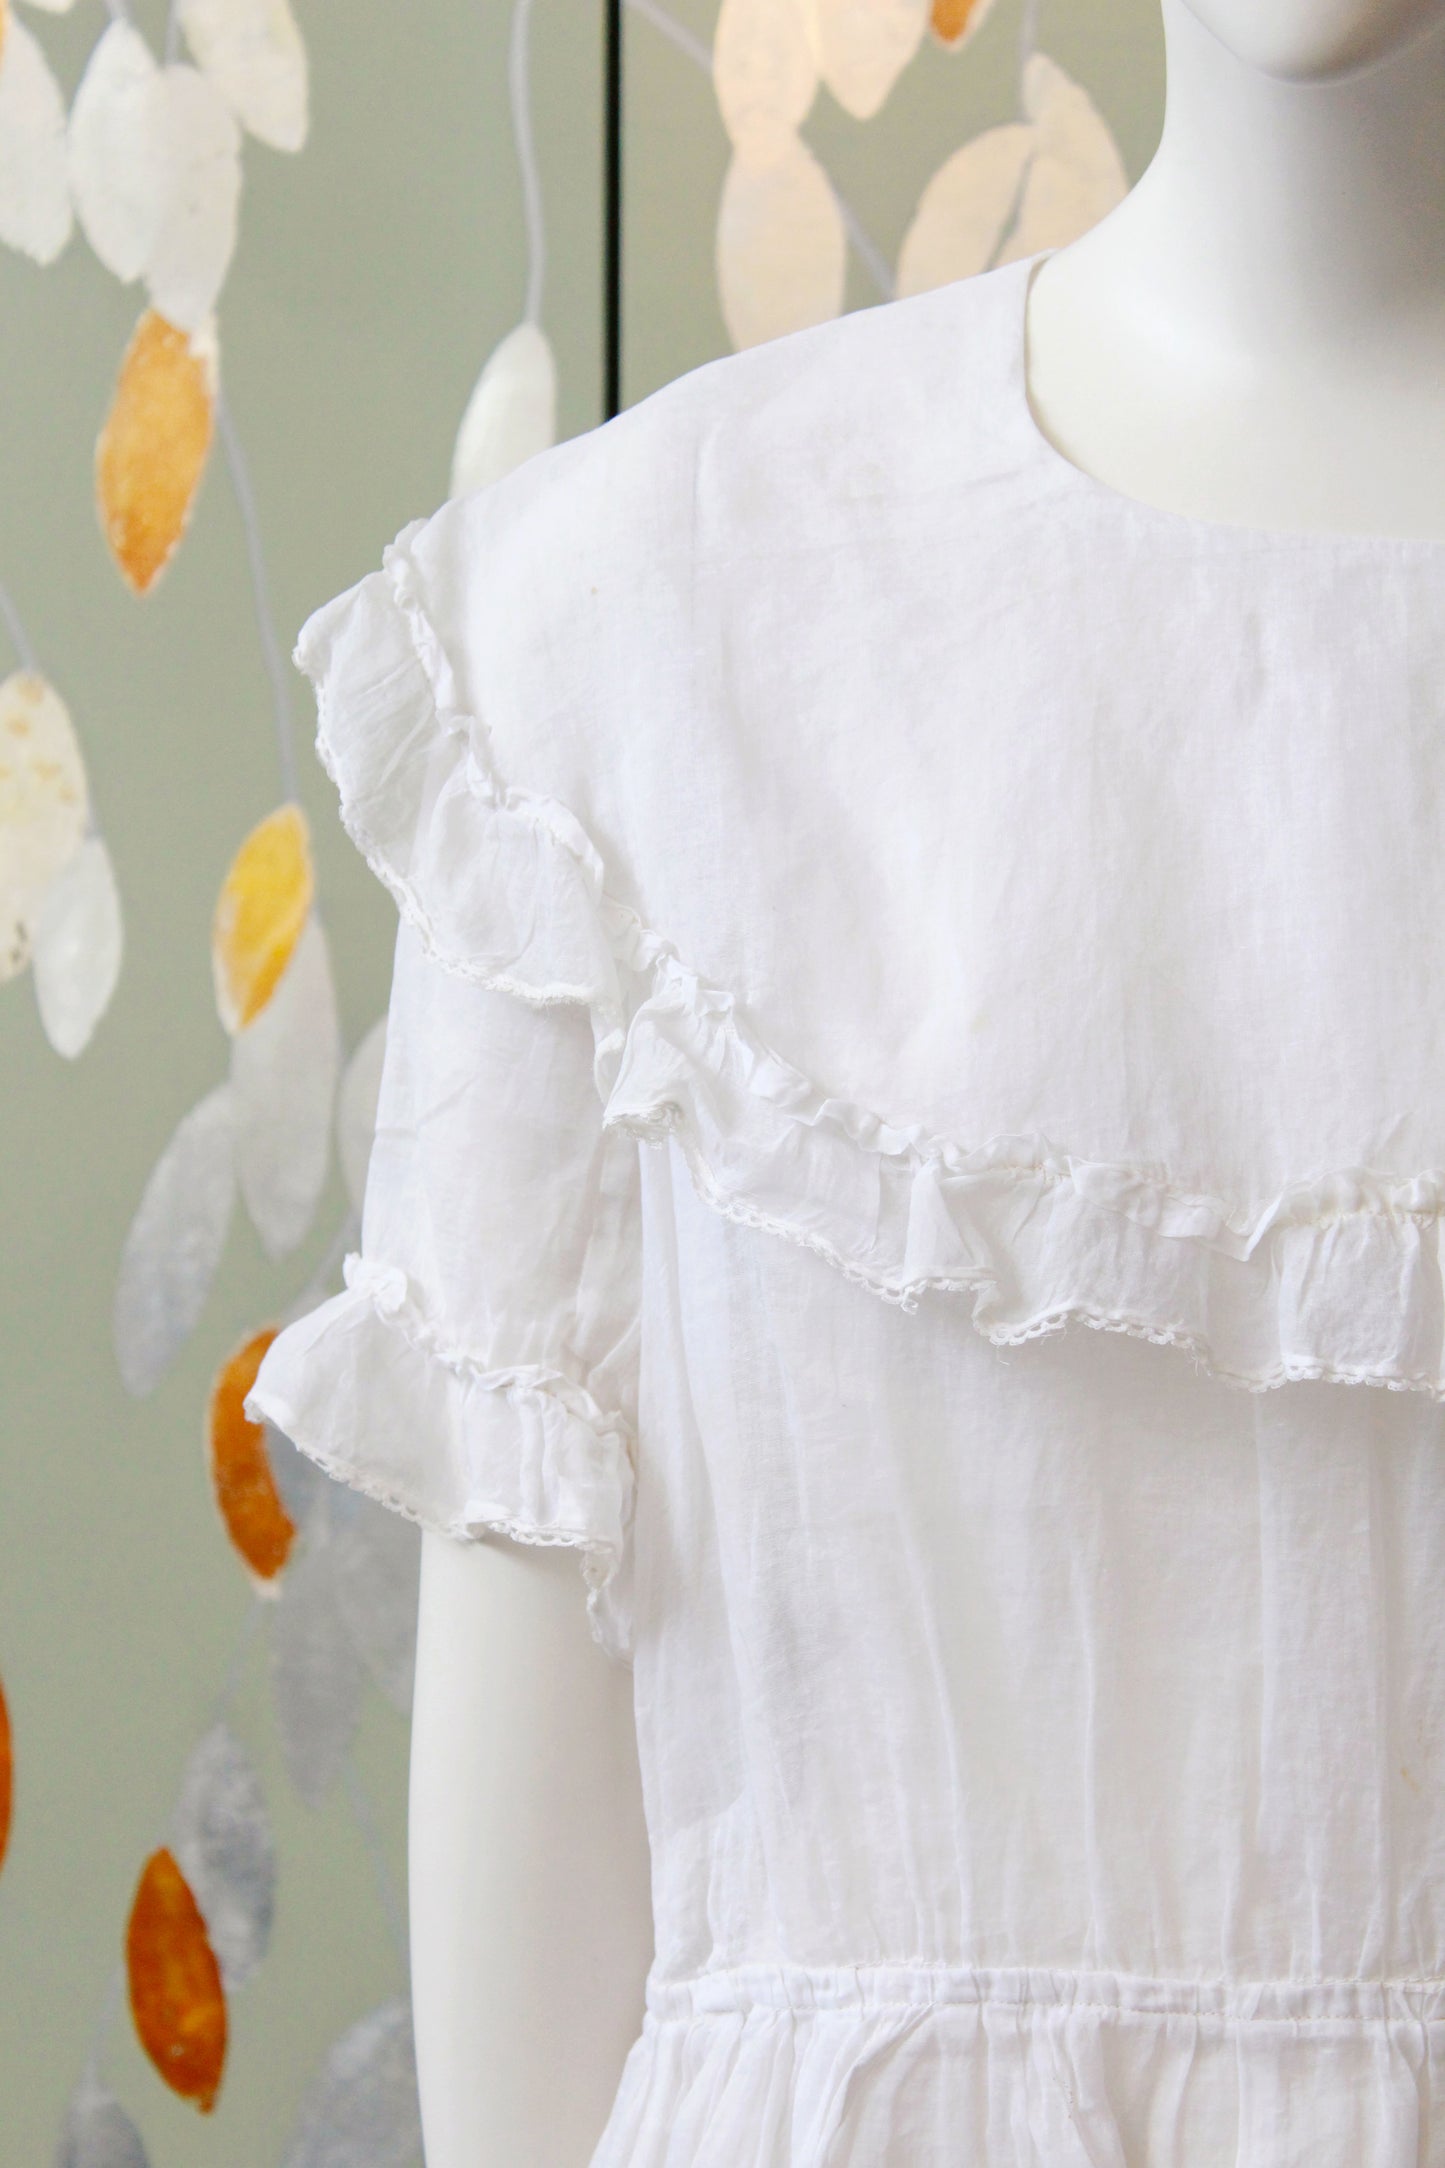 Mid 1920s White Ruffle Collar Day Dress, Size S, White Summer Dress, Antique Day Dress